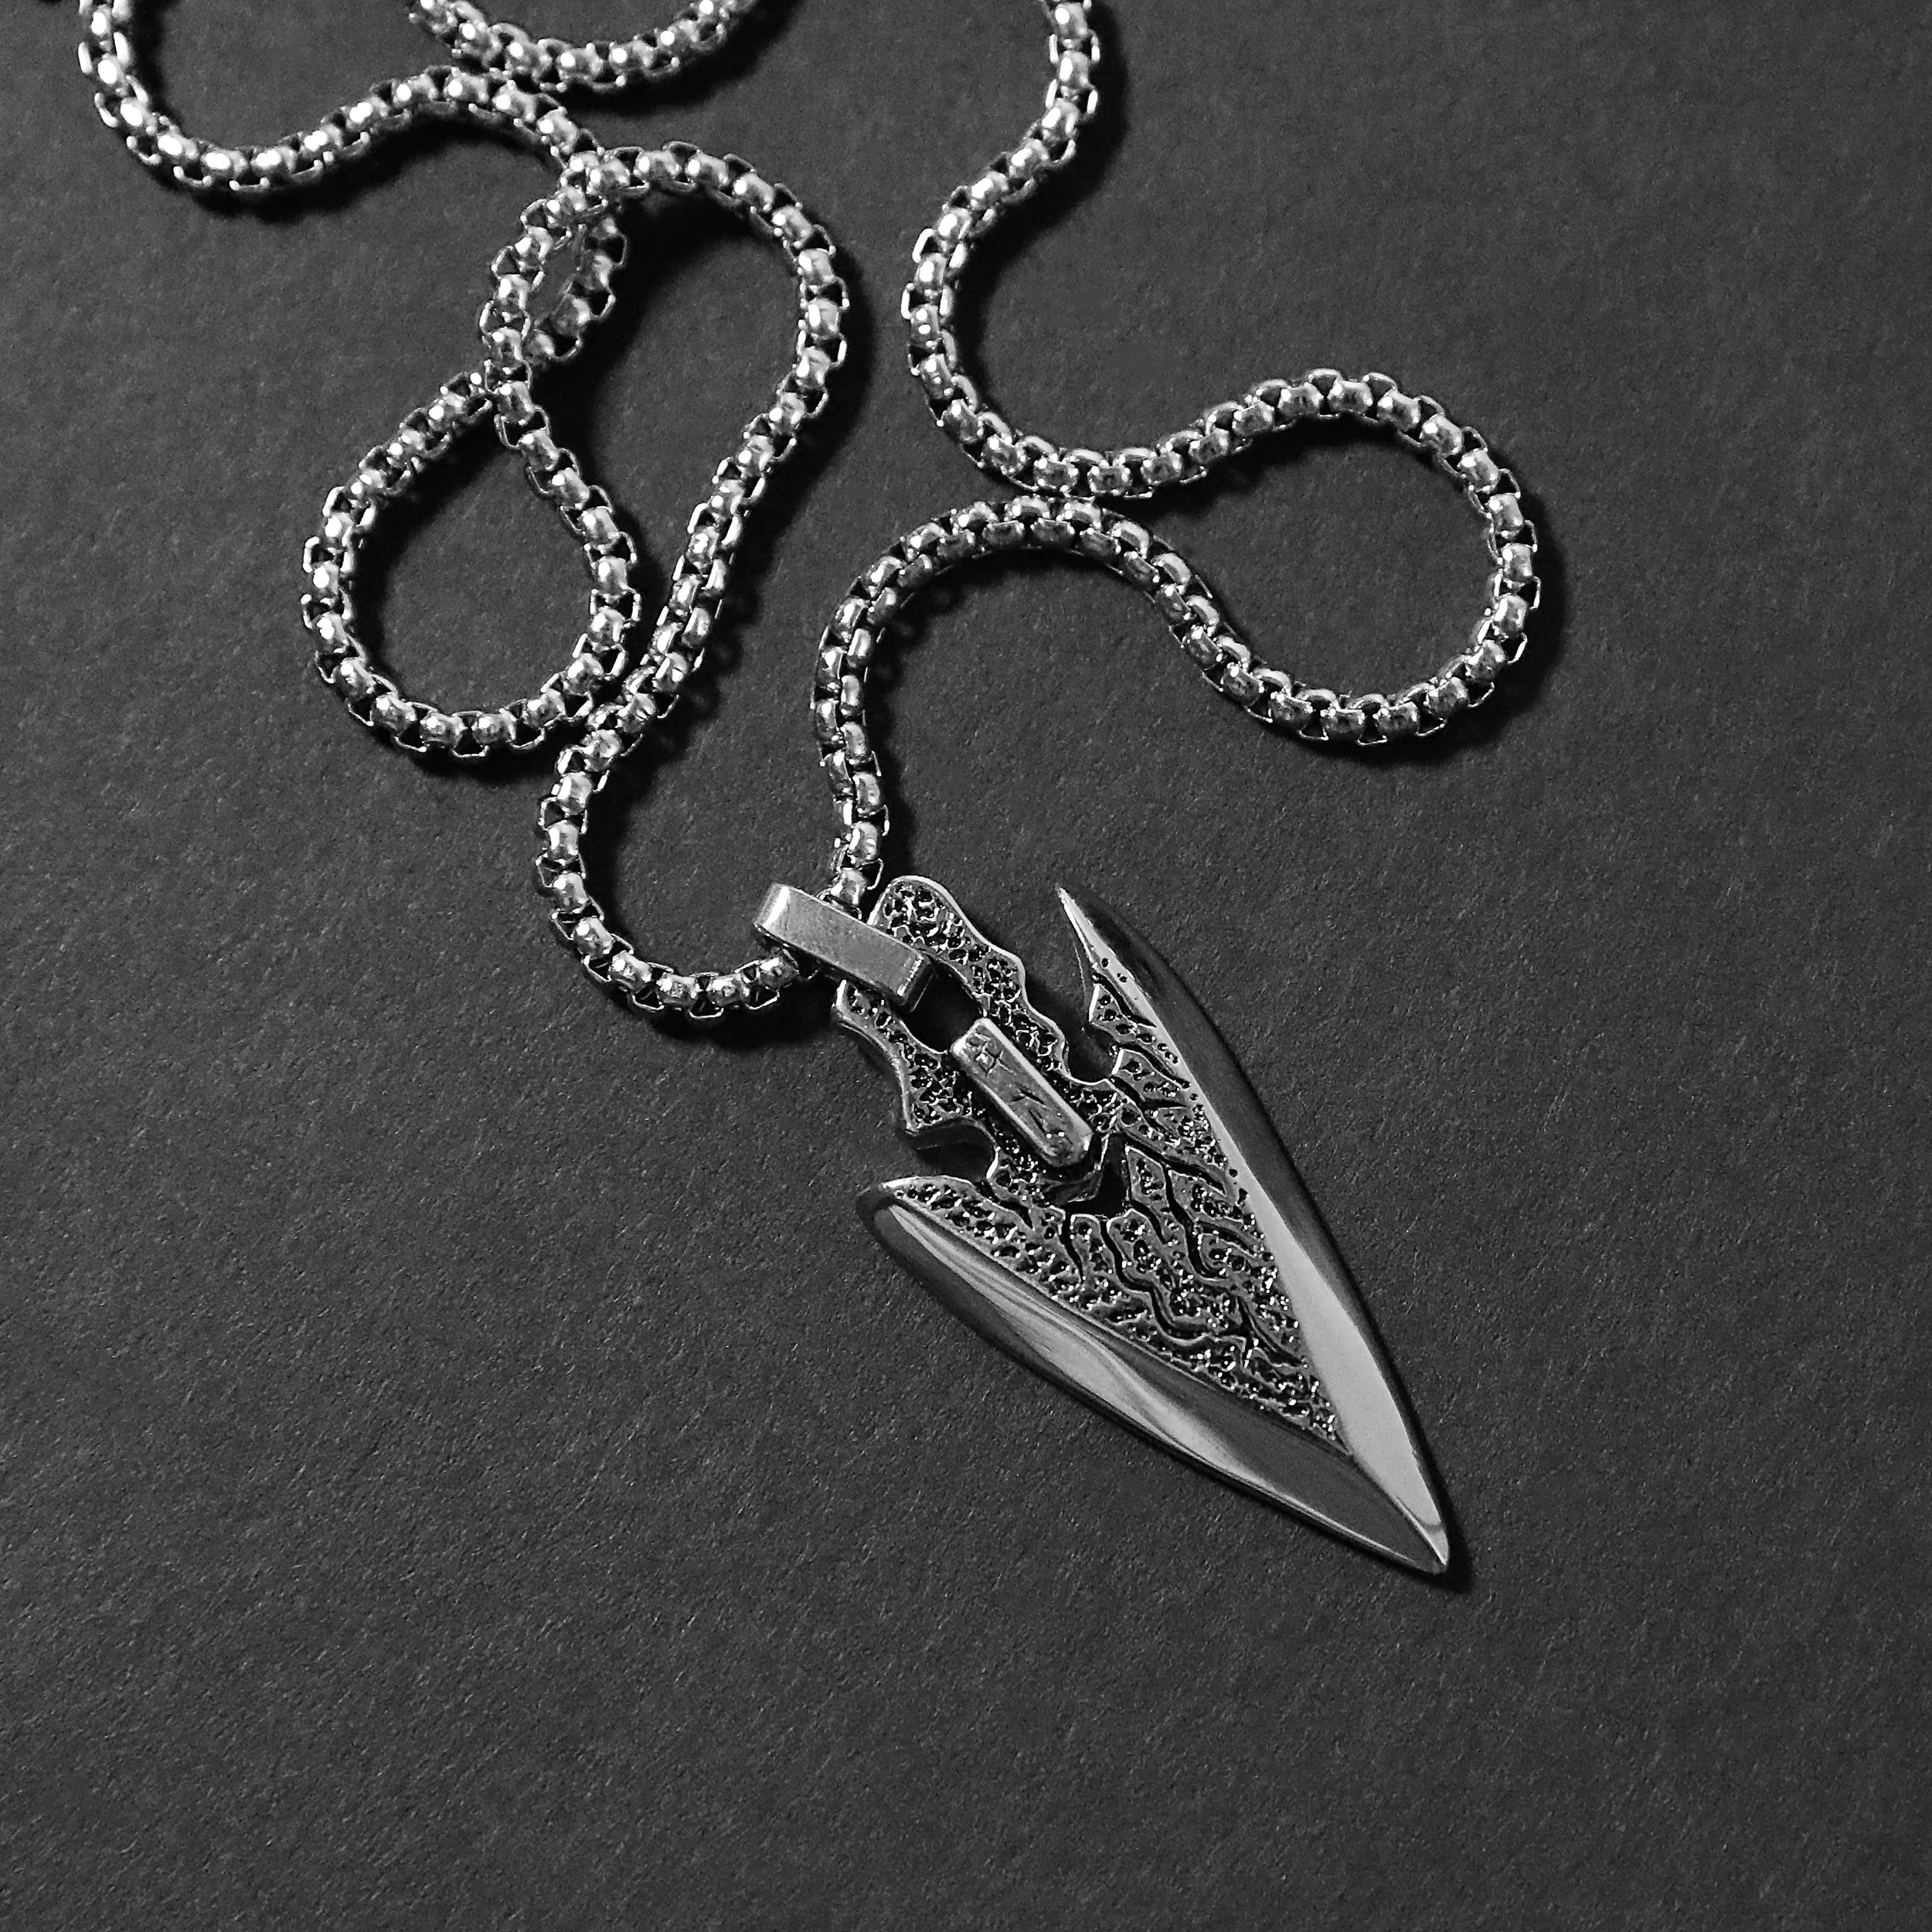 Women's Stainless Steel Brushed Small Arrowhead Necklace, 22 Inch - Black  Bow Jewelry Company